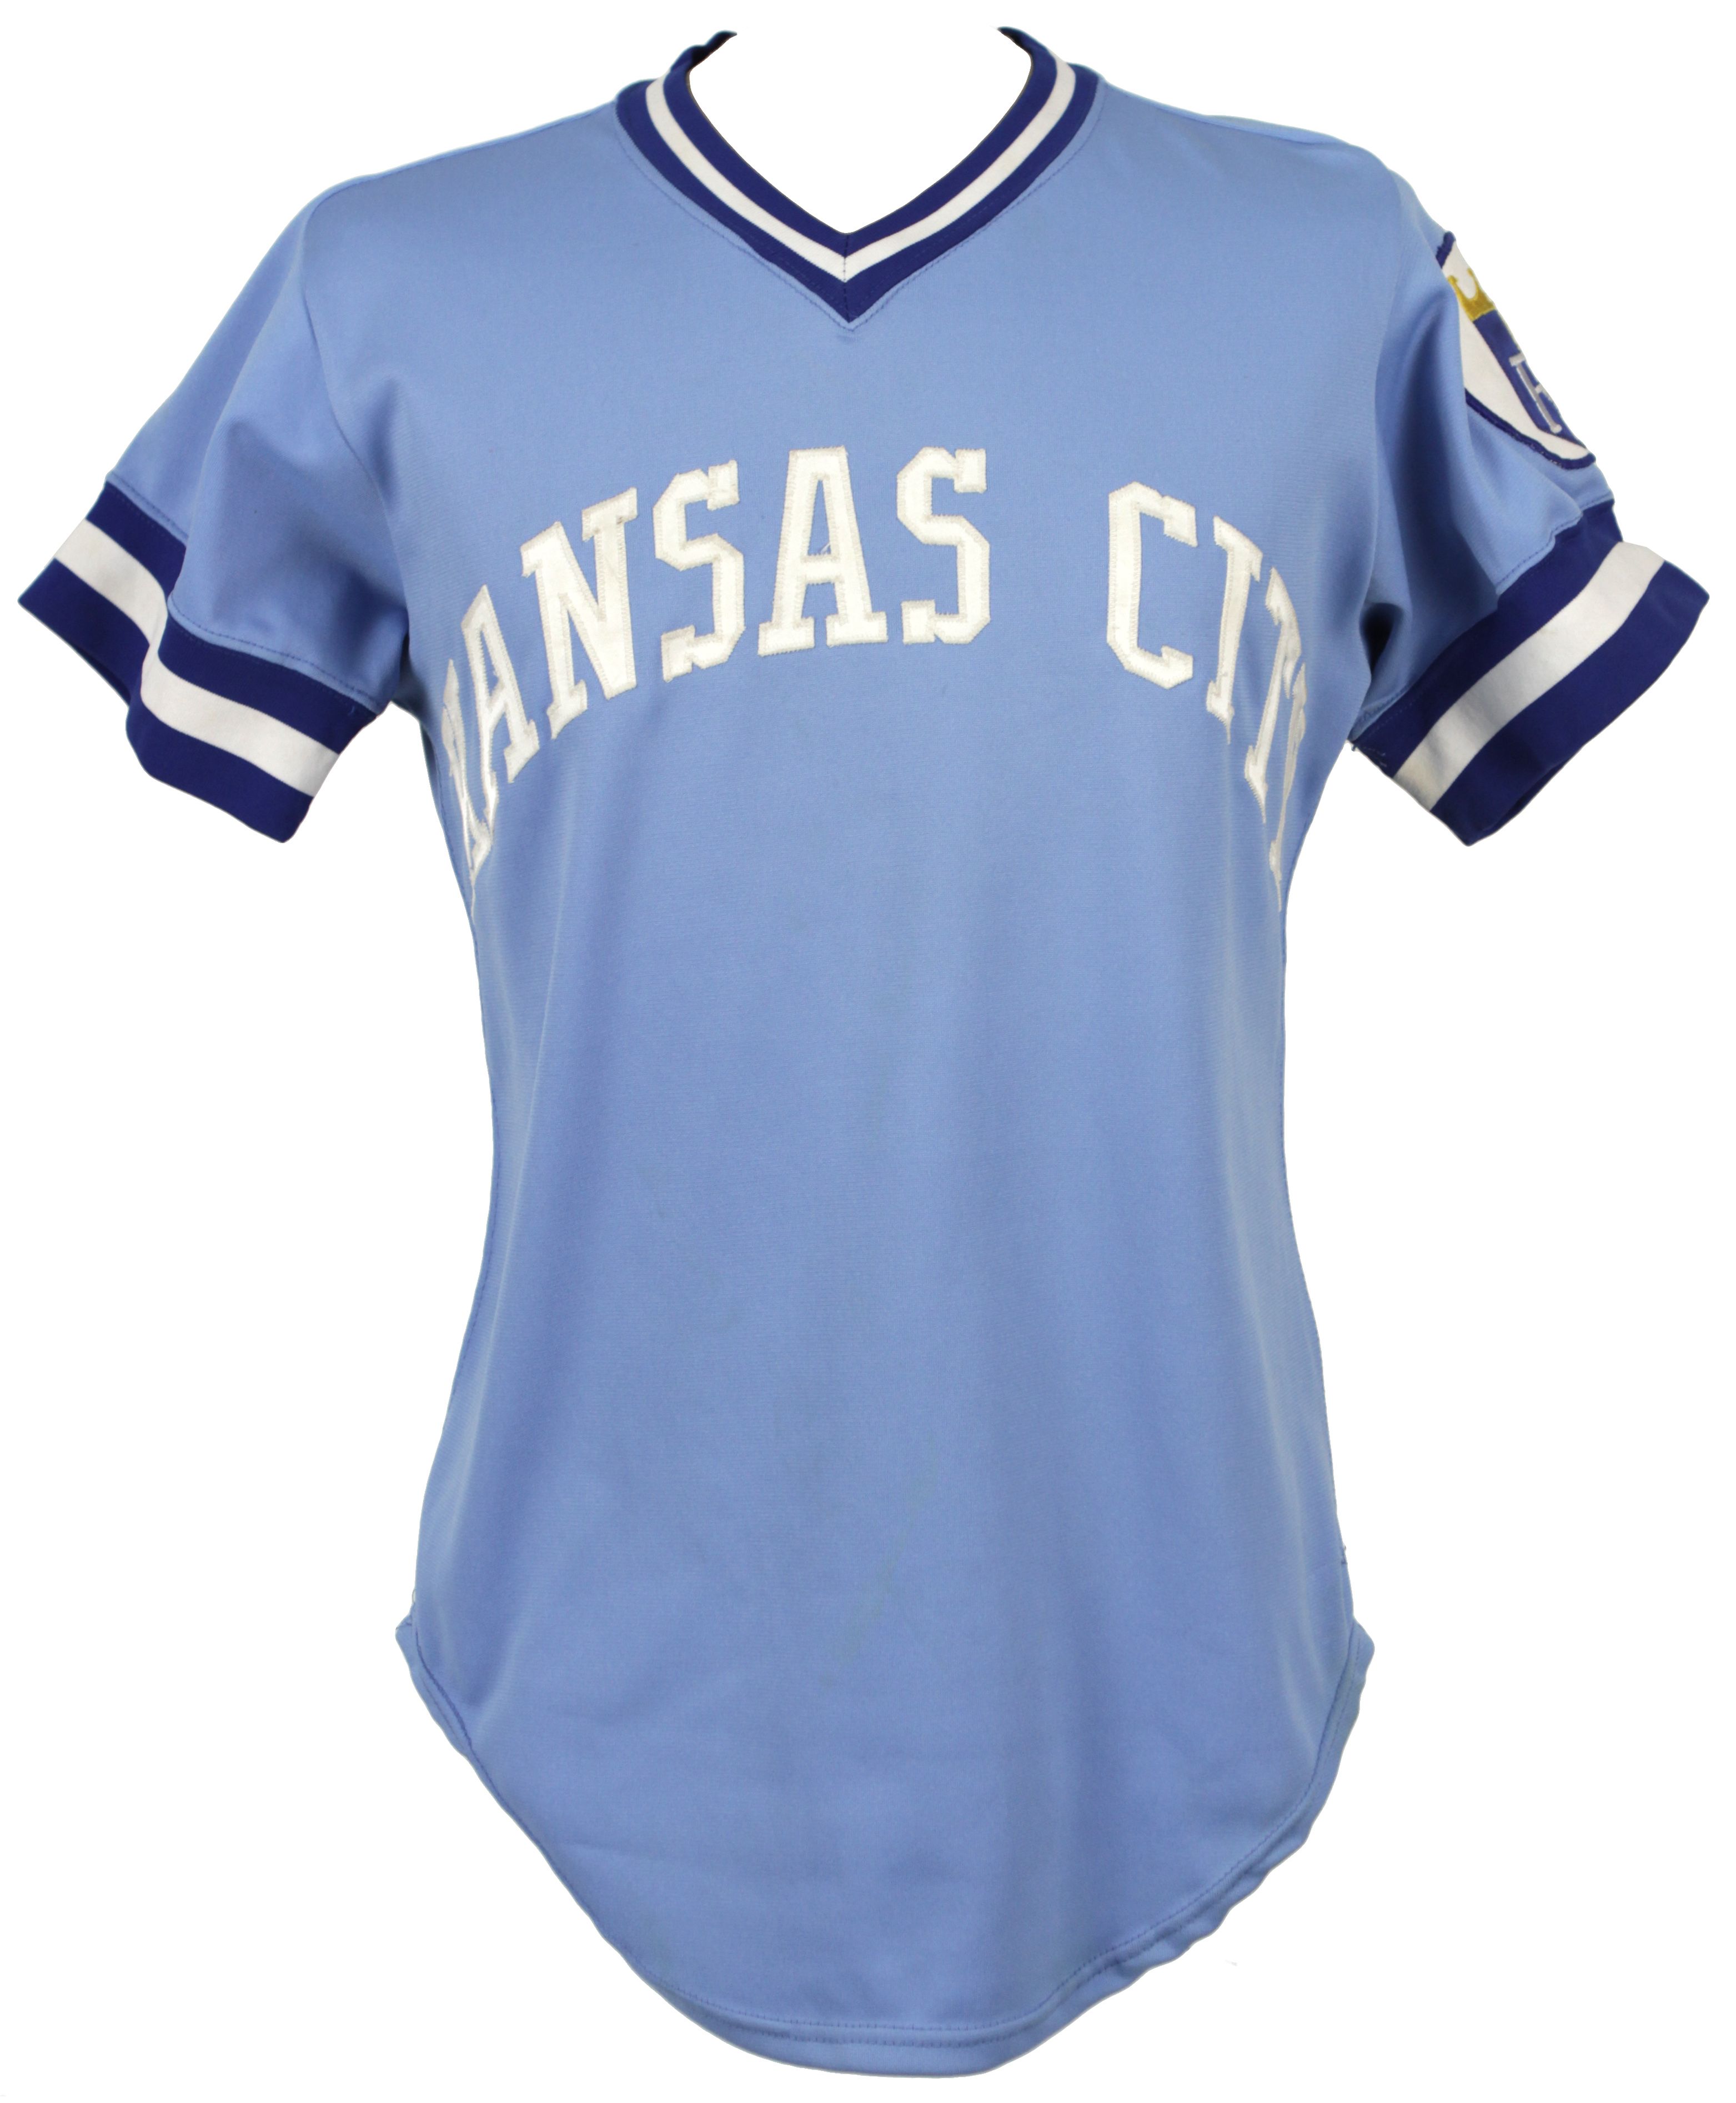 George Brett 1979 Kansas City Royals Game Used Jersey - Game Used Only